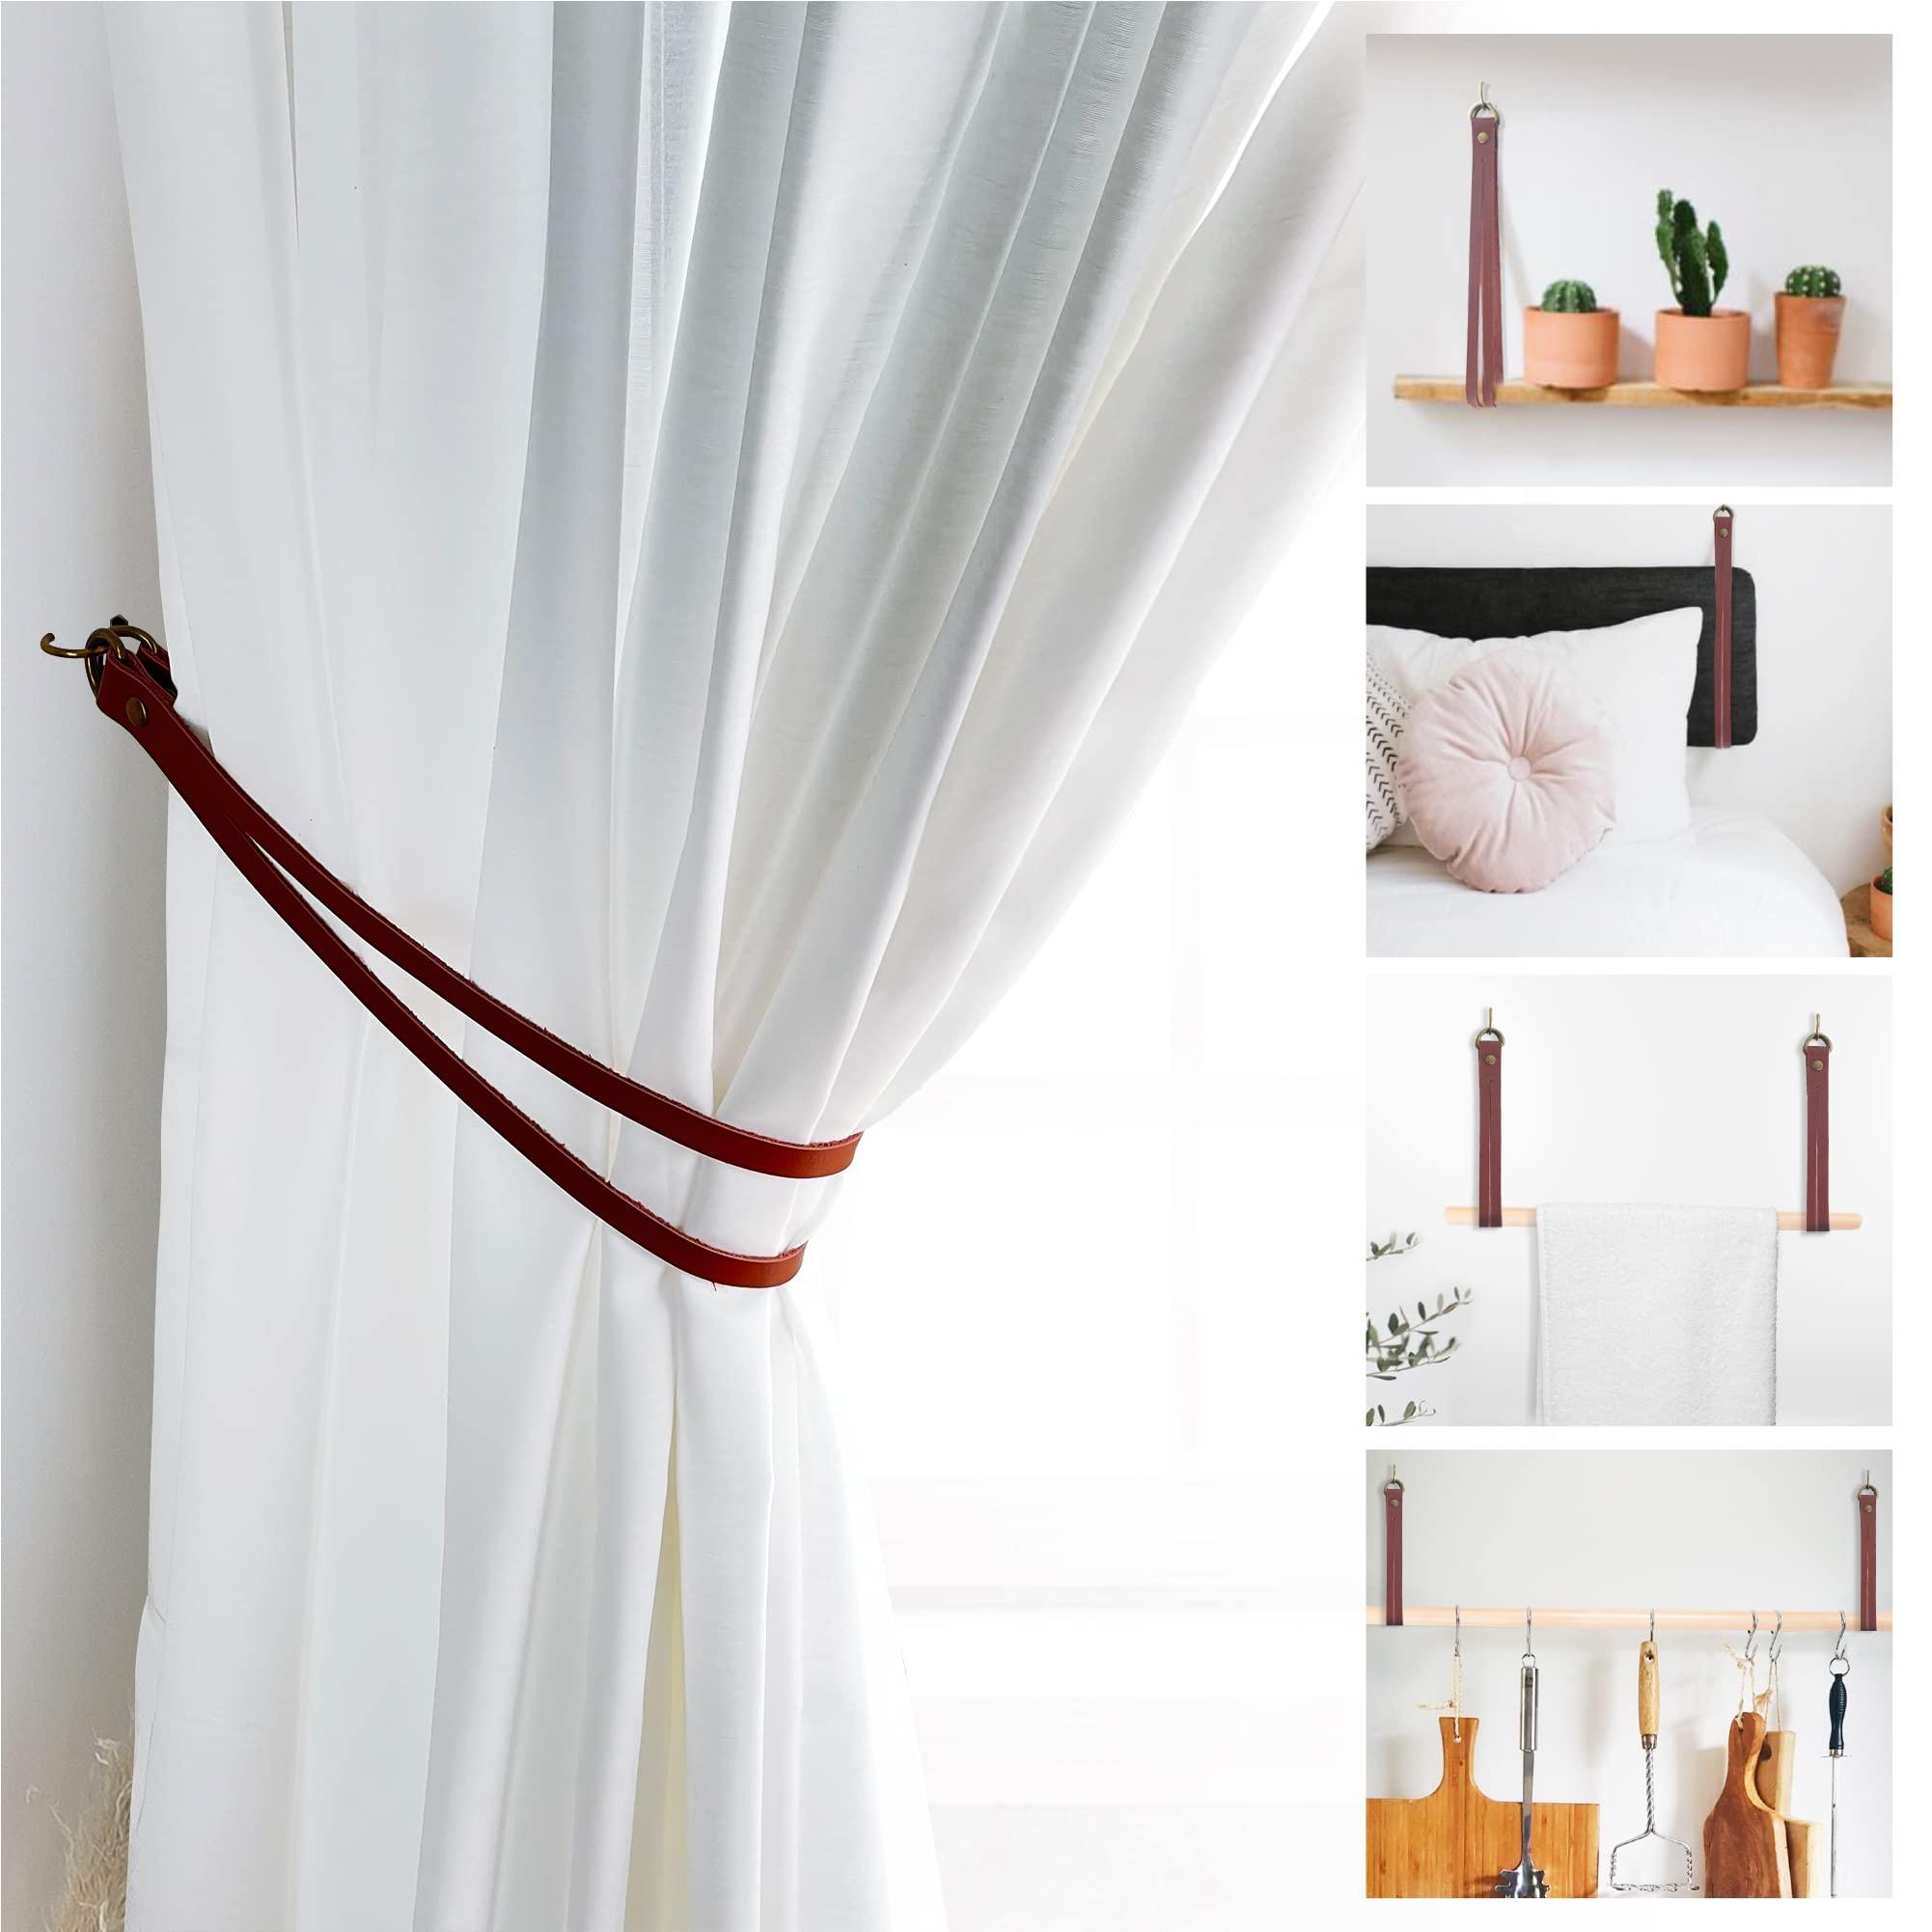 Set of 2 curtain tiebacks made of cowhide. Designer tiebacks. Use them as a wall decoration hanger or a bathroom accessory. Includes wall anchor hooks. (Brown)